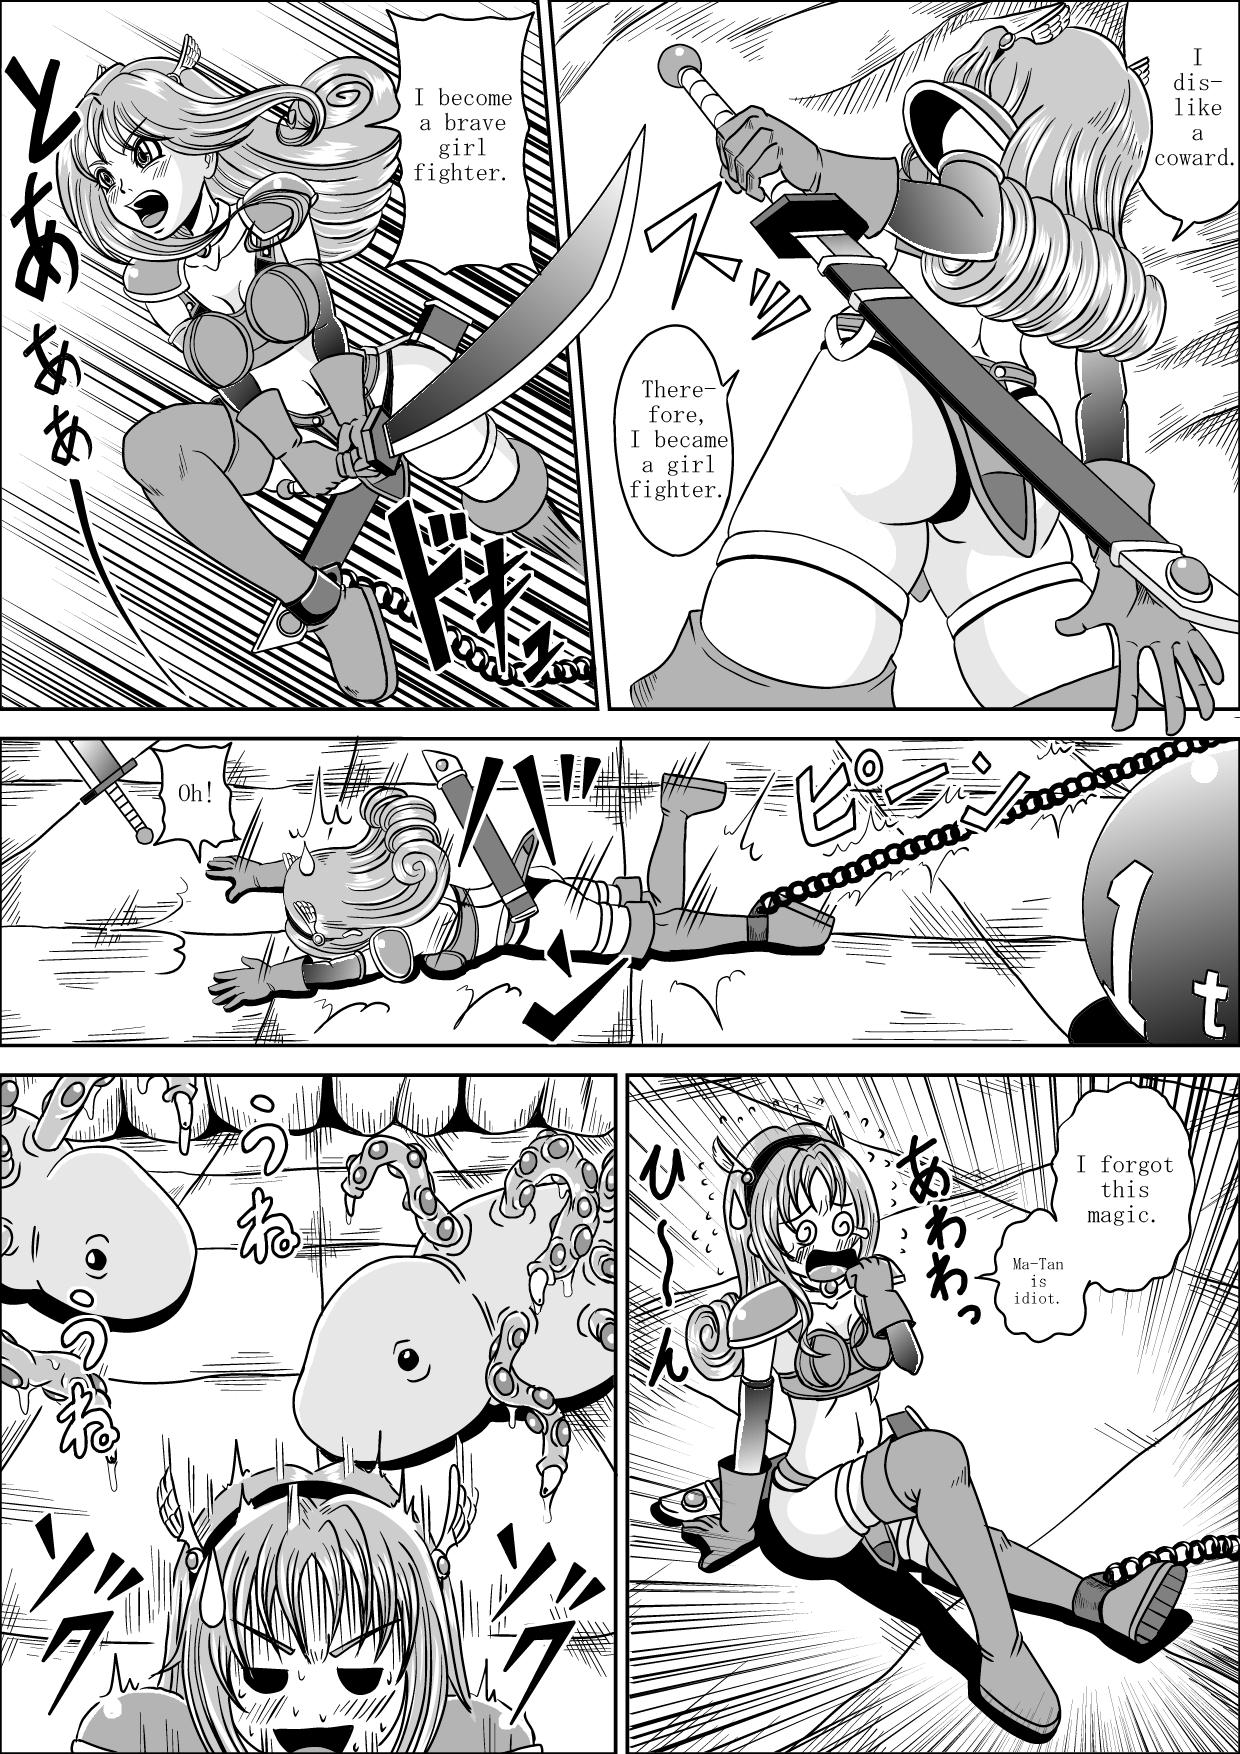 No Condom A FAINTHEARTED GIRL FIGHTER CHI-CHAN'S ADVENTURE Perra - Page 9